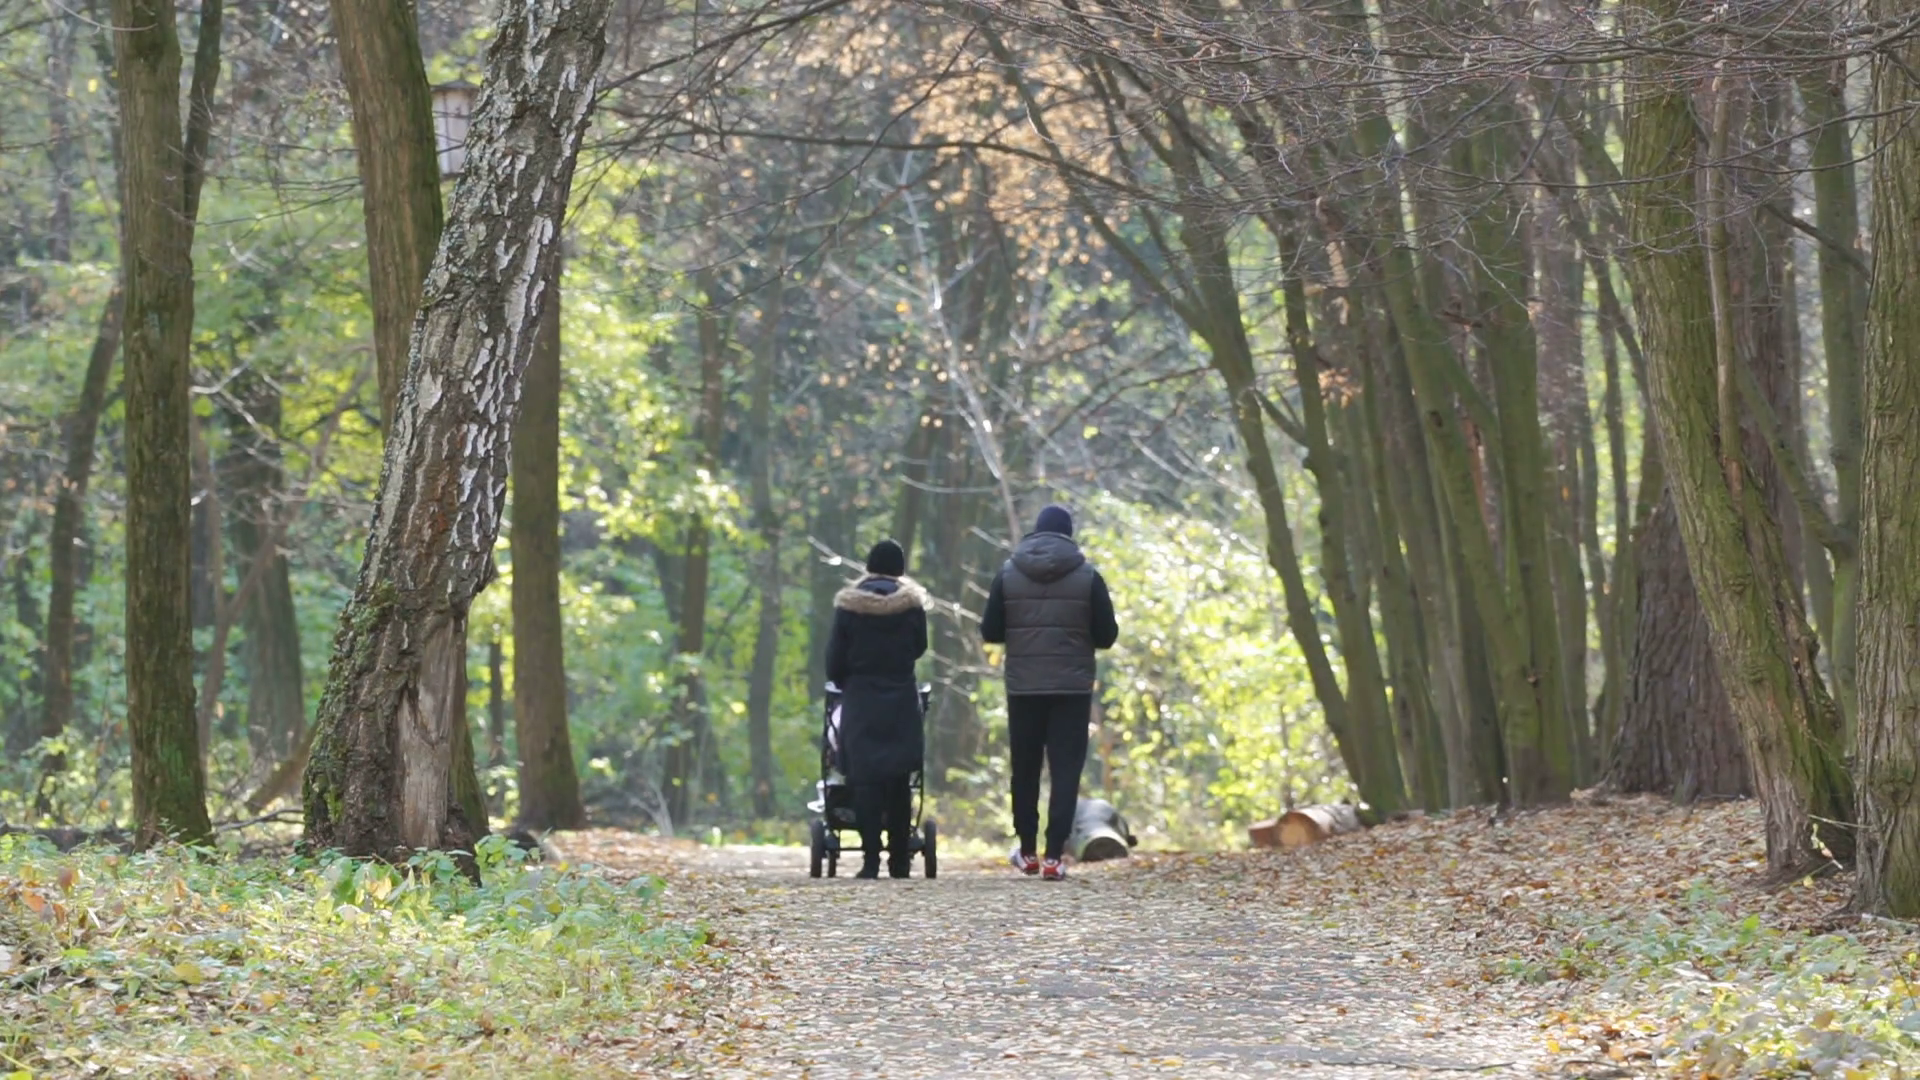 young-parents-walking-with-baby-stroller-in-forest-nice-sunny-autumn-weather_hxd6iopbg_thumbnail-full01.png